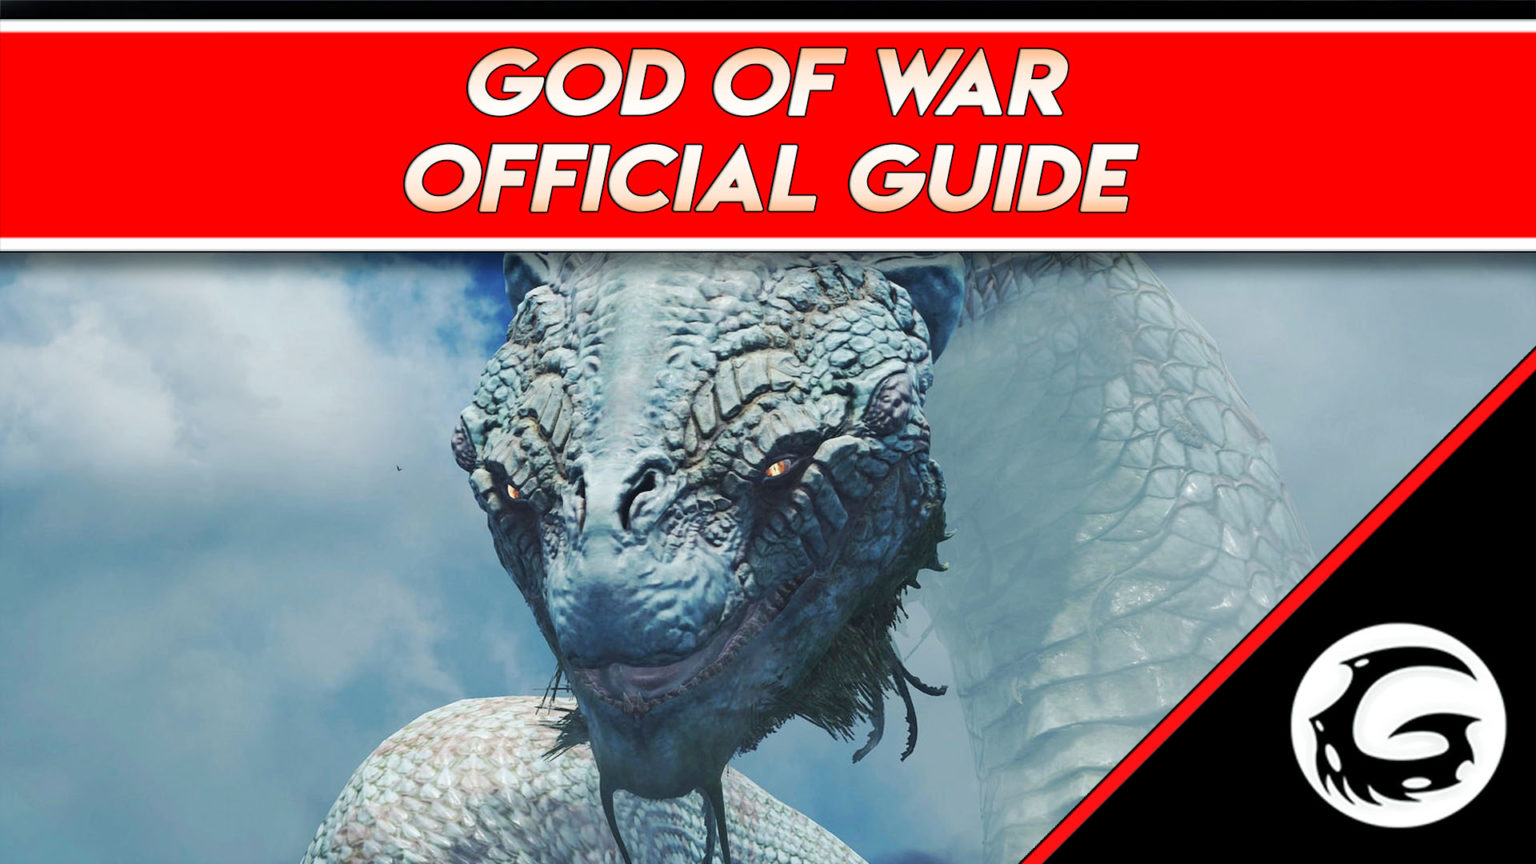 Giant Sea Serpent from God of War (2018) Official Guide Thumbnail